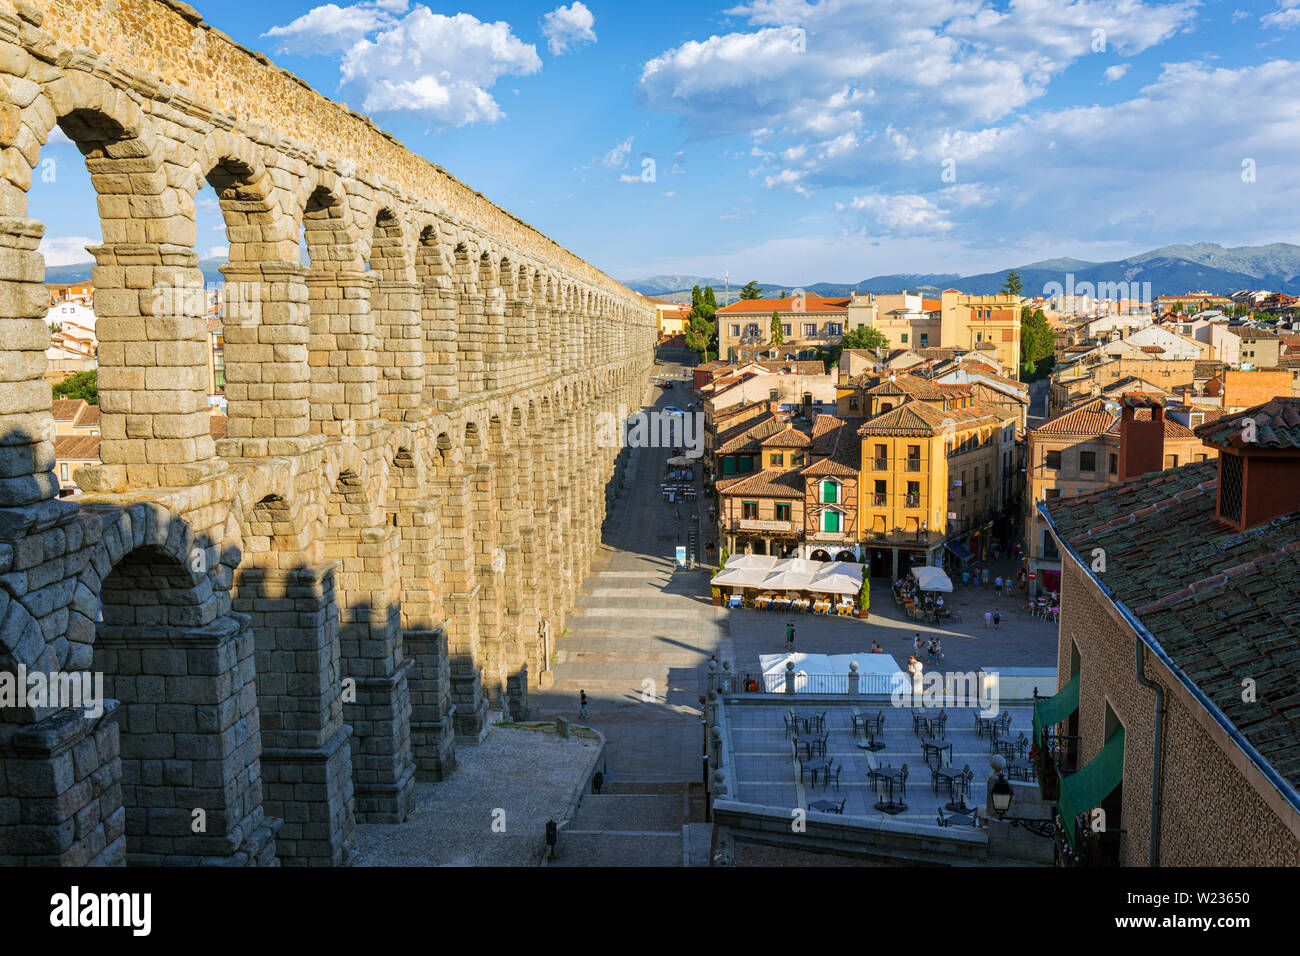 Segovia, Segovia Province, Castile and Leon, Spain.  The Roman Aqueduct in Plaza del Azoguejo which dates from the 1st or 2nd century AD.  The Old Tow Stock Photo